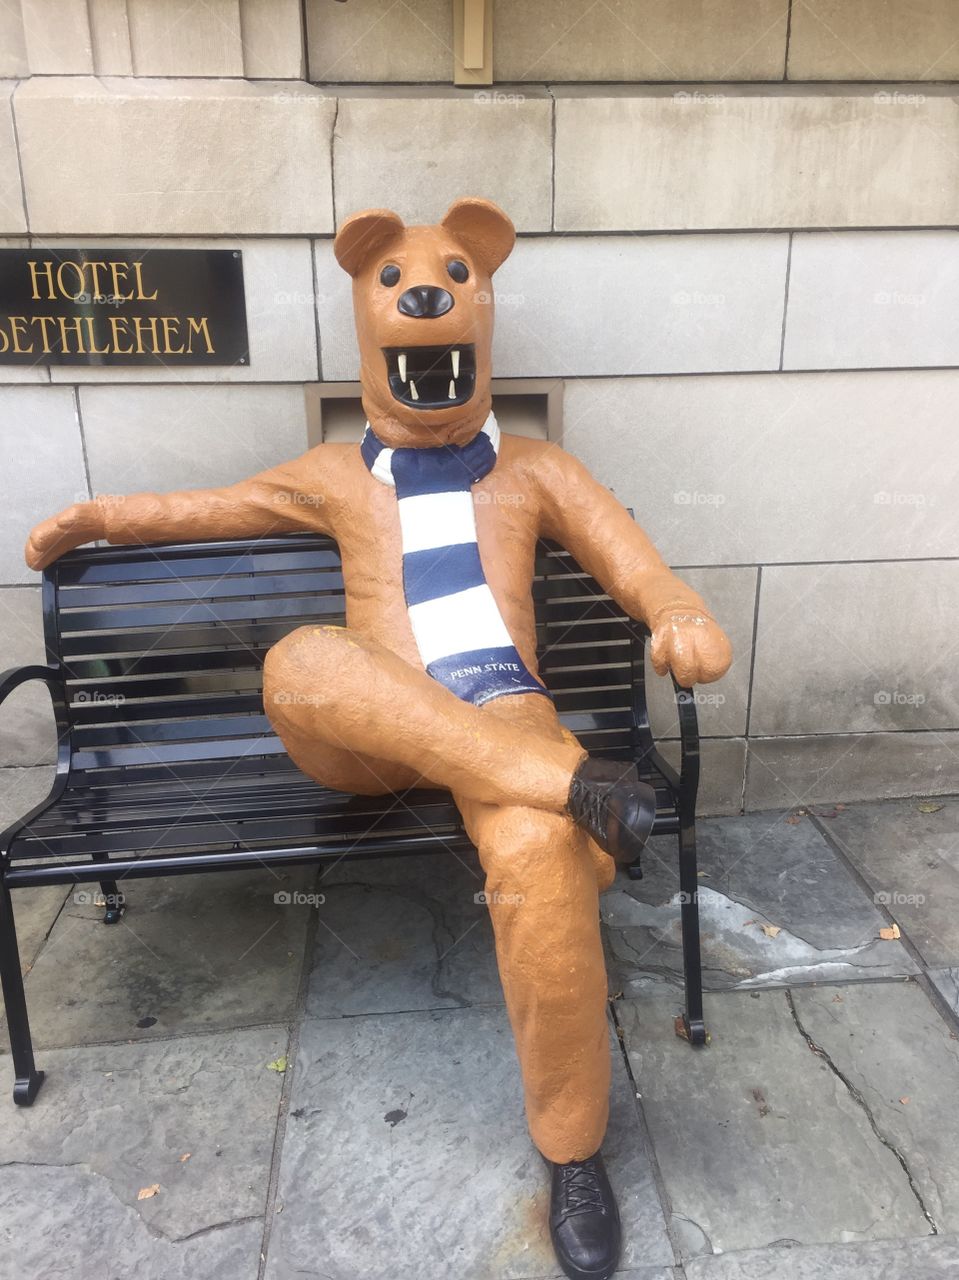 Statue of a bear sitting on a bench